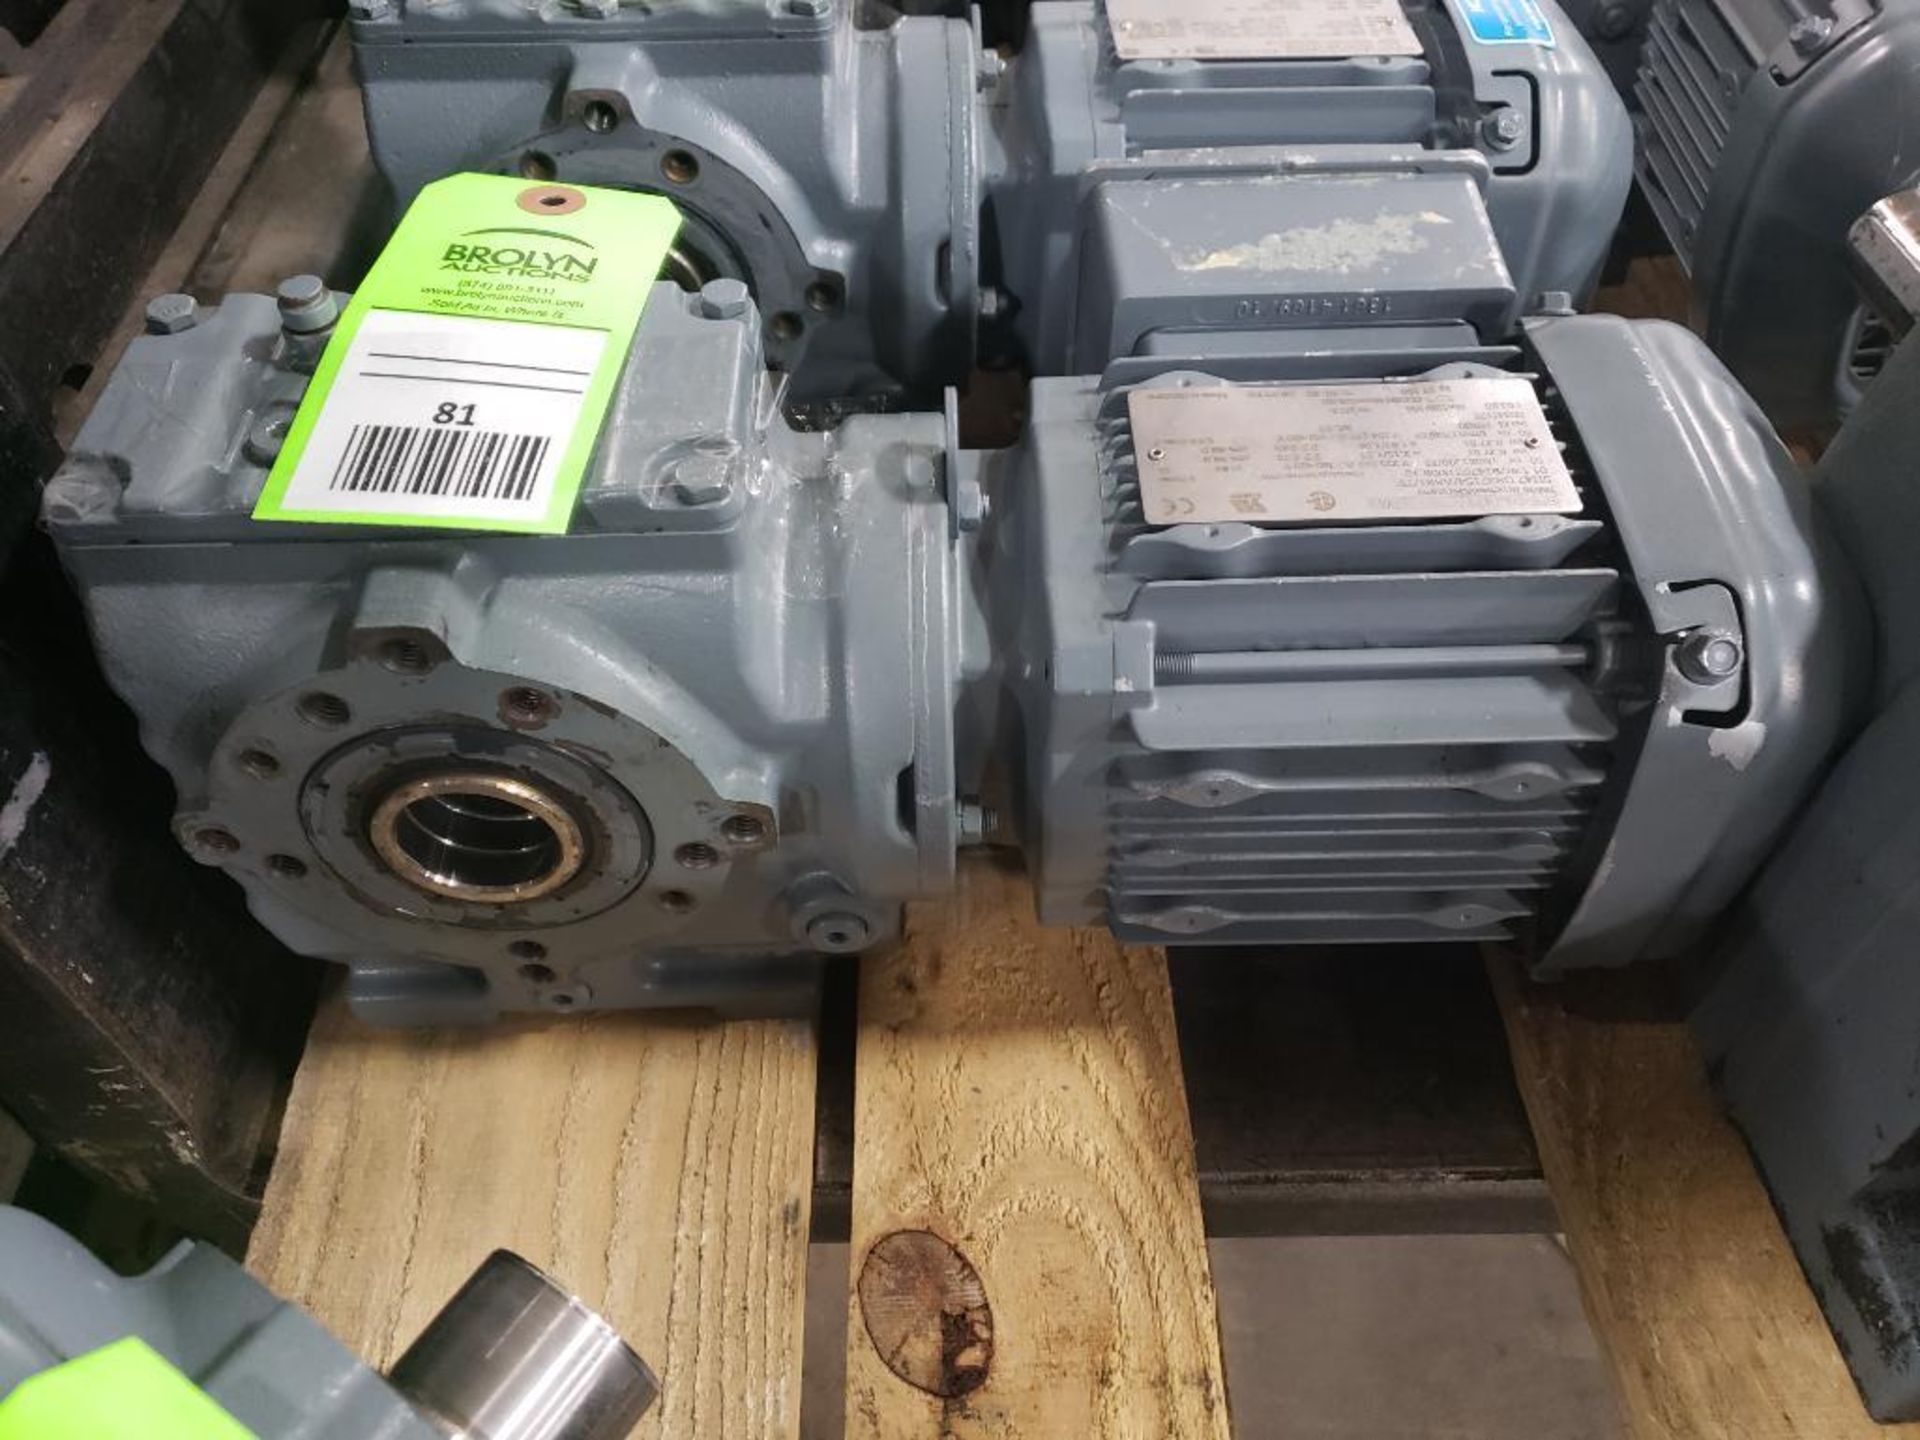 Sew Eurodrive motor and gearbox. Model SH47-DRS71S4/ASB1/TF.